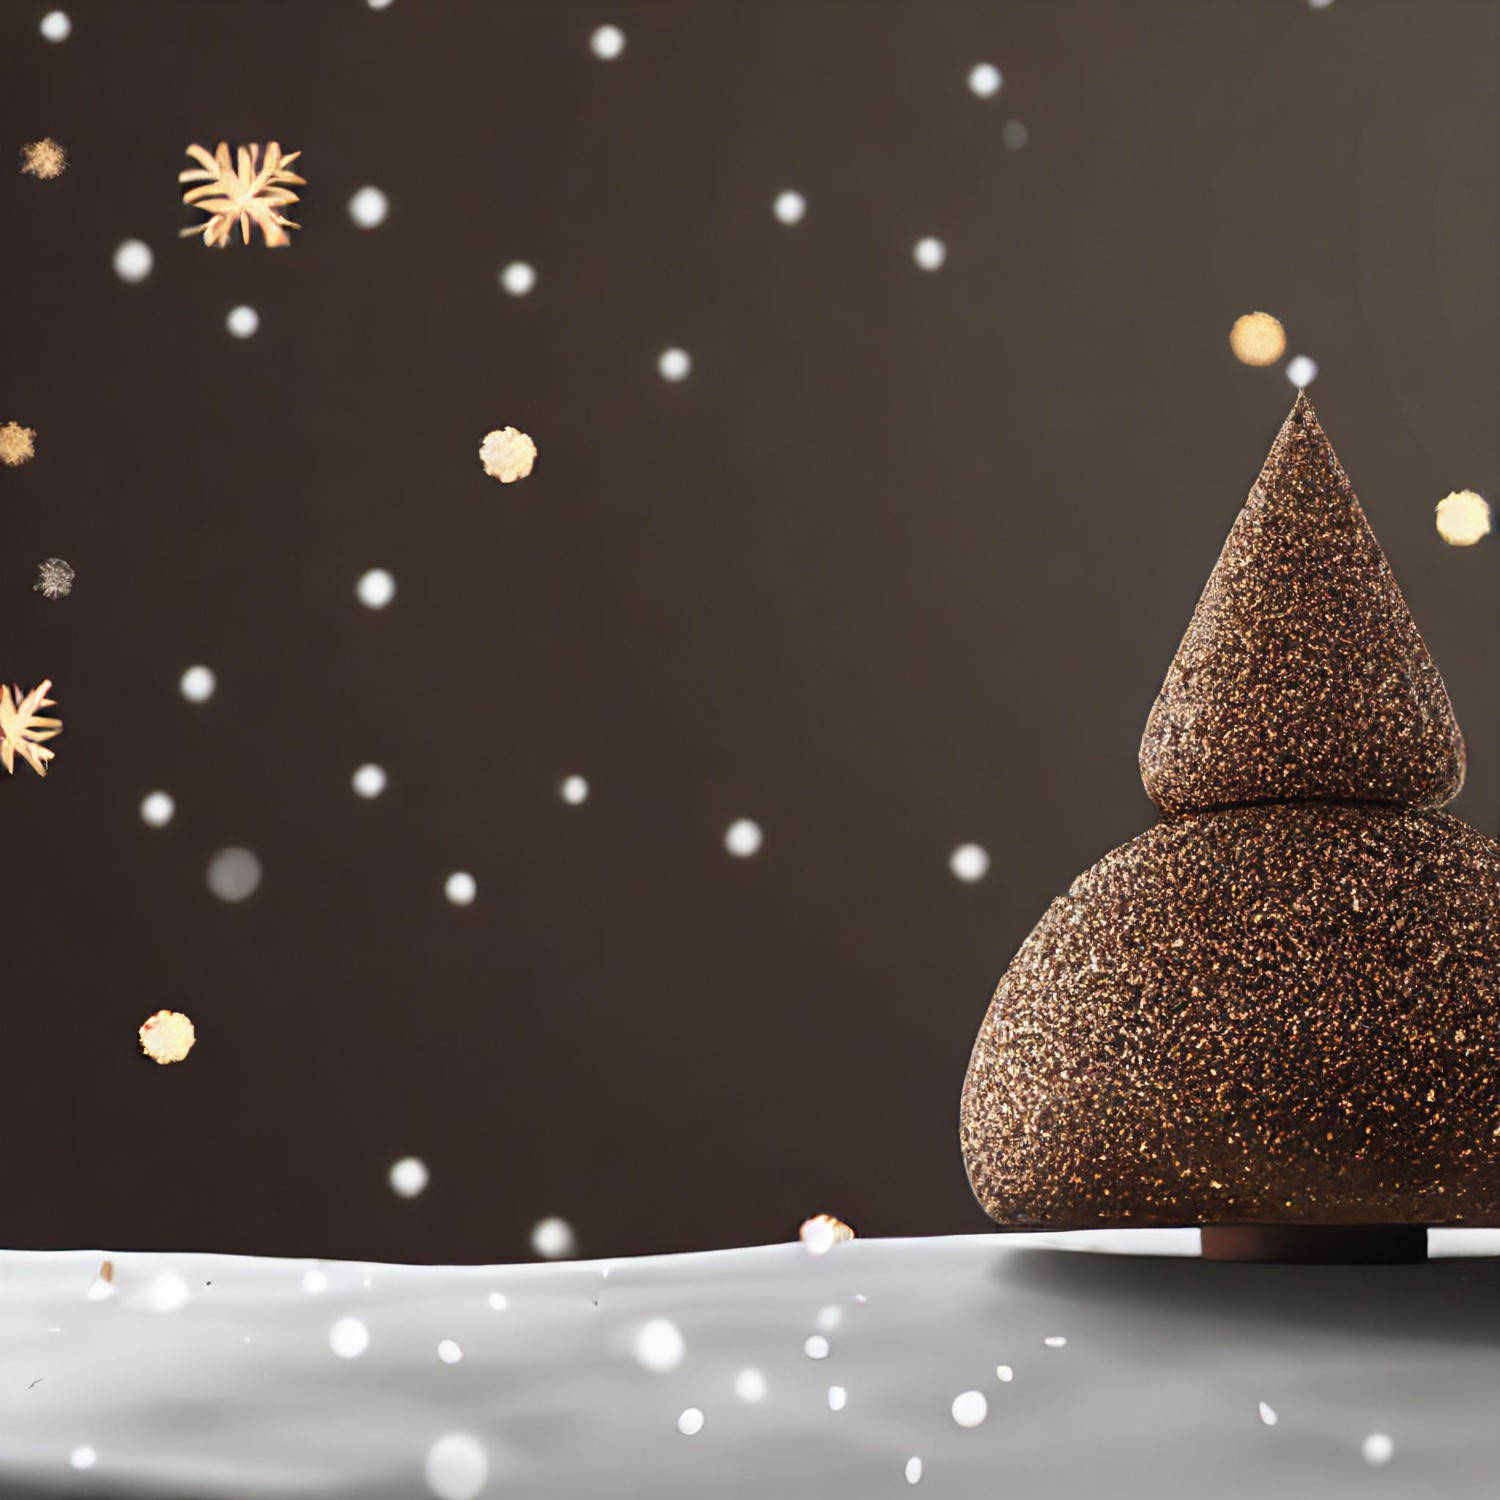 A Christmas Tree With Snow Falling On It Wallpaper